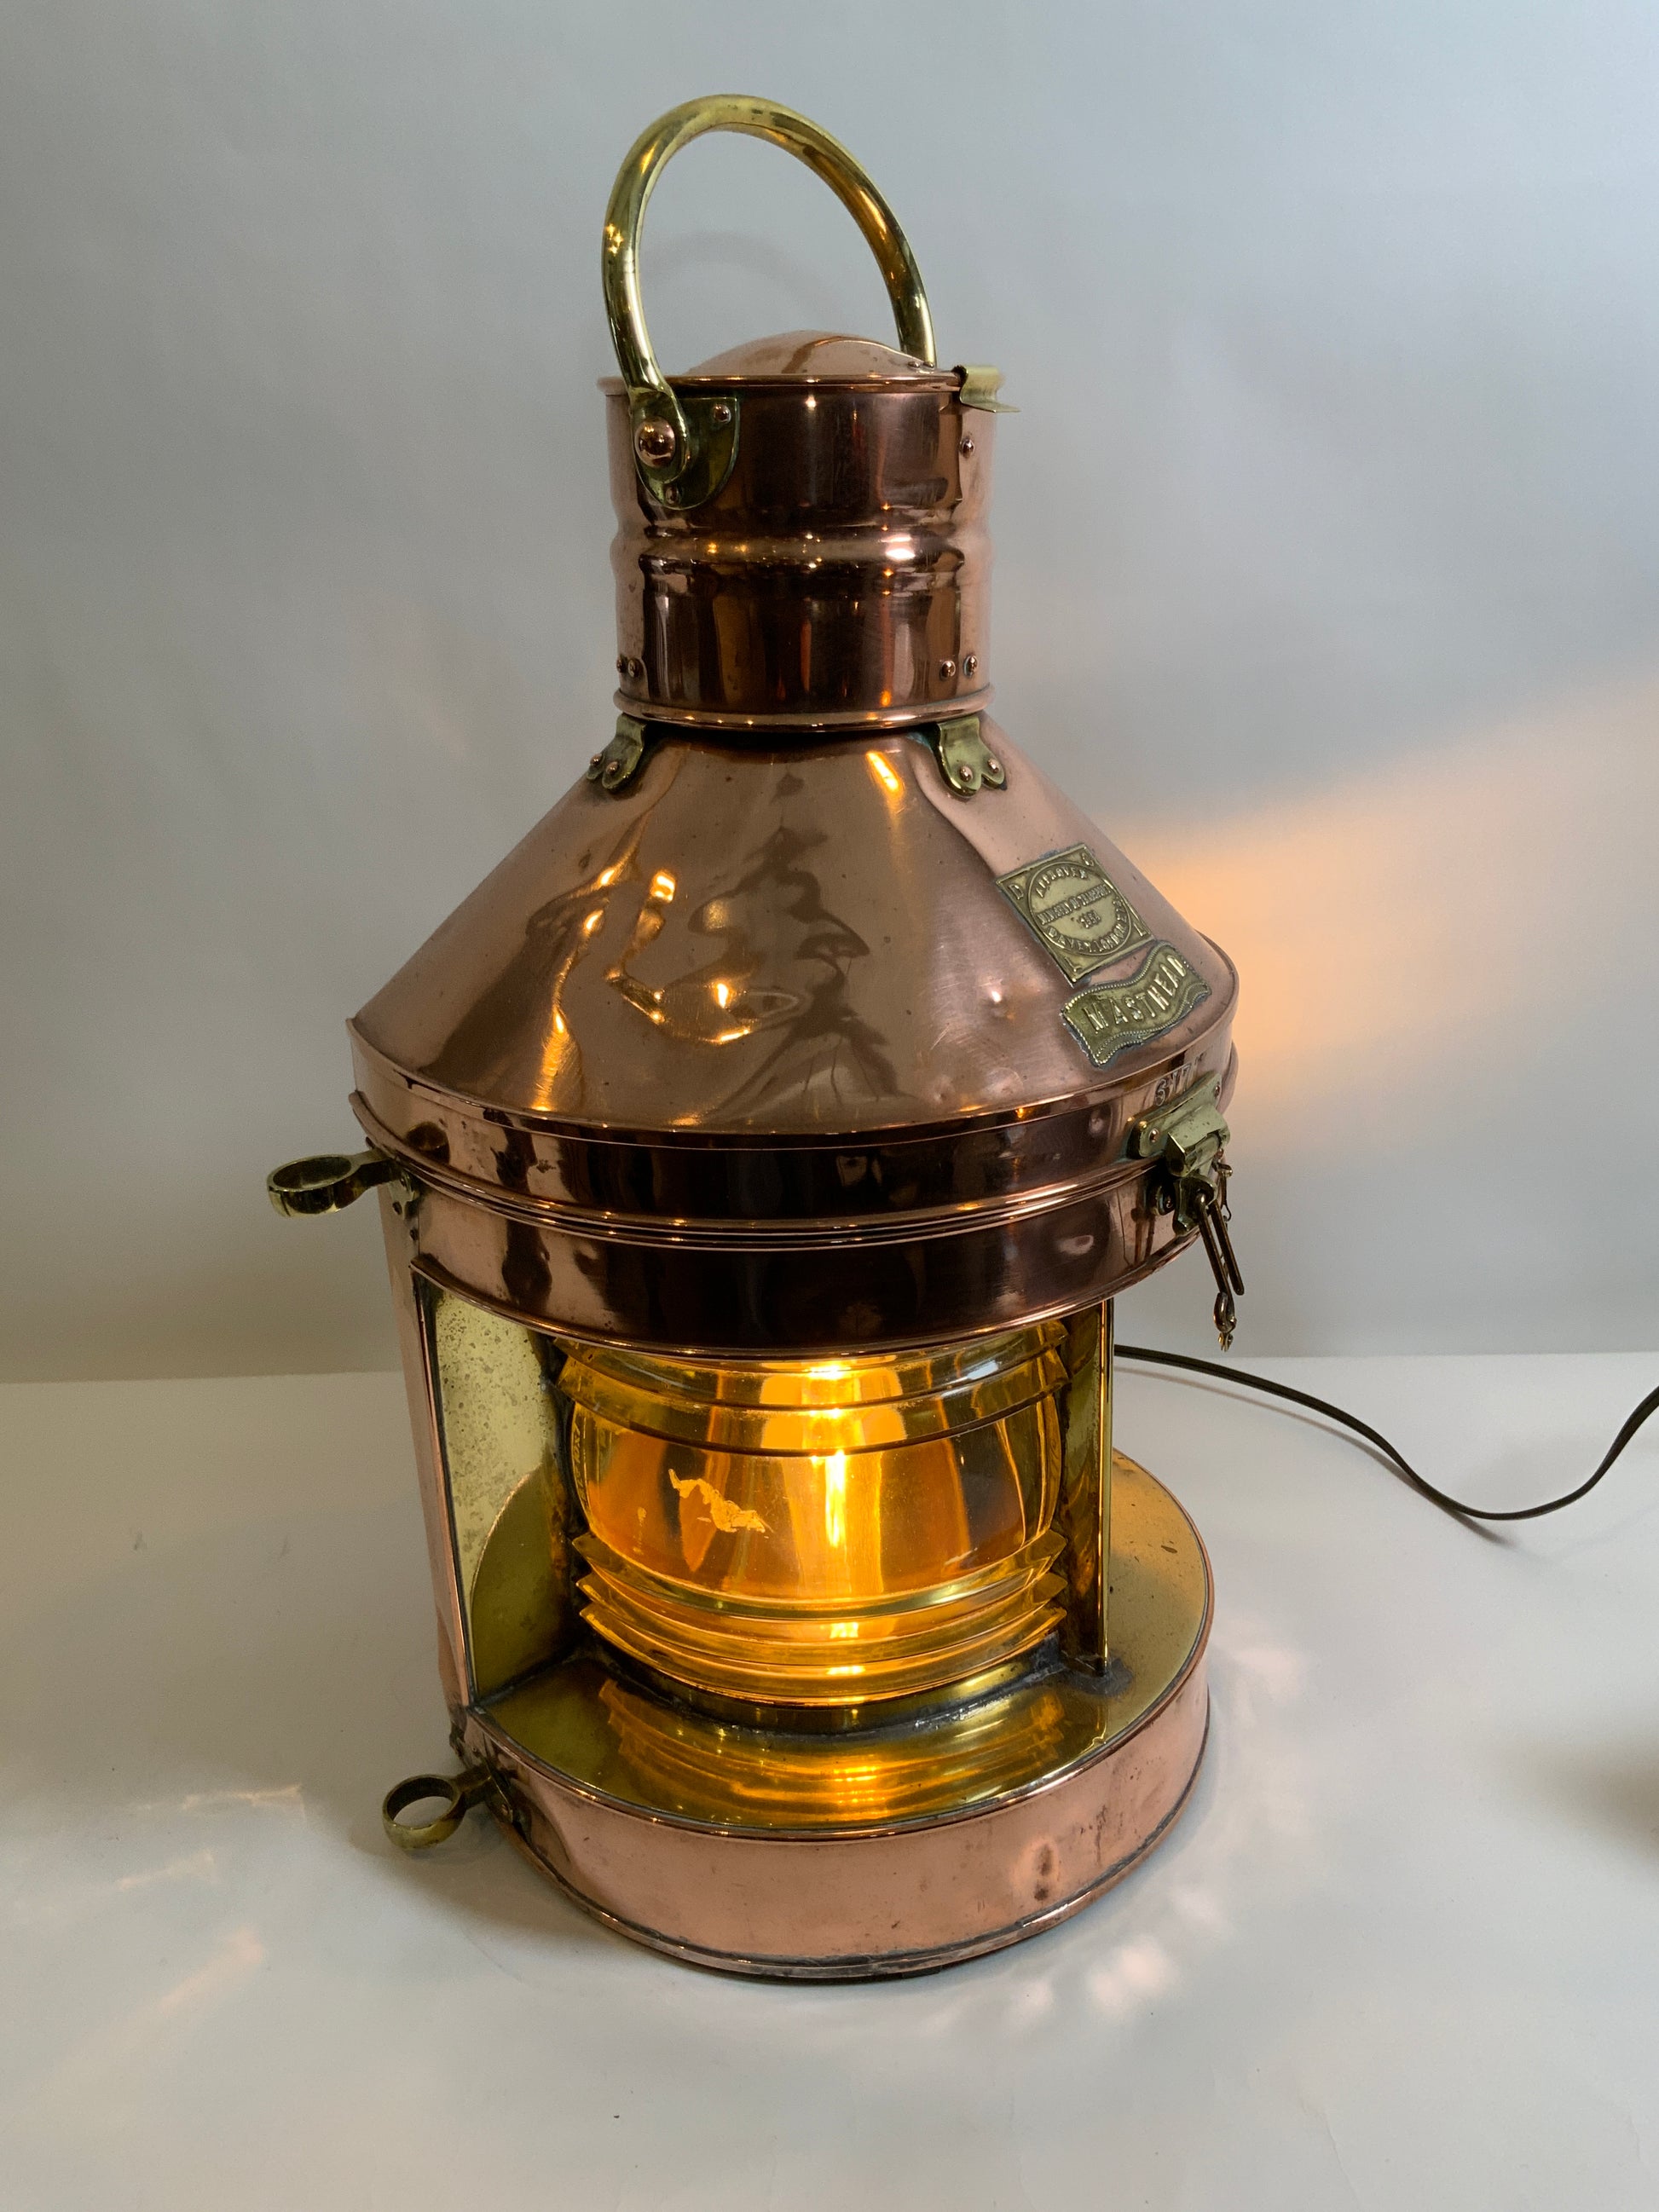 Copper and Brass Ship's Masthead Lantern by Davey of London - Lannan Gallery